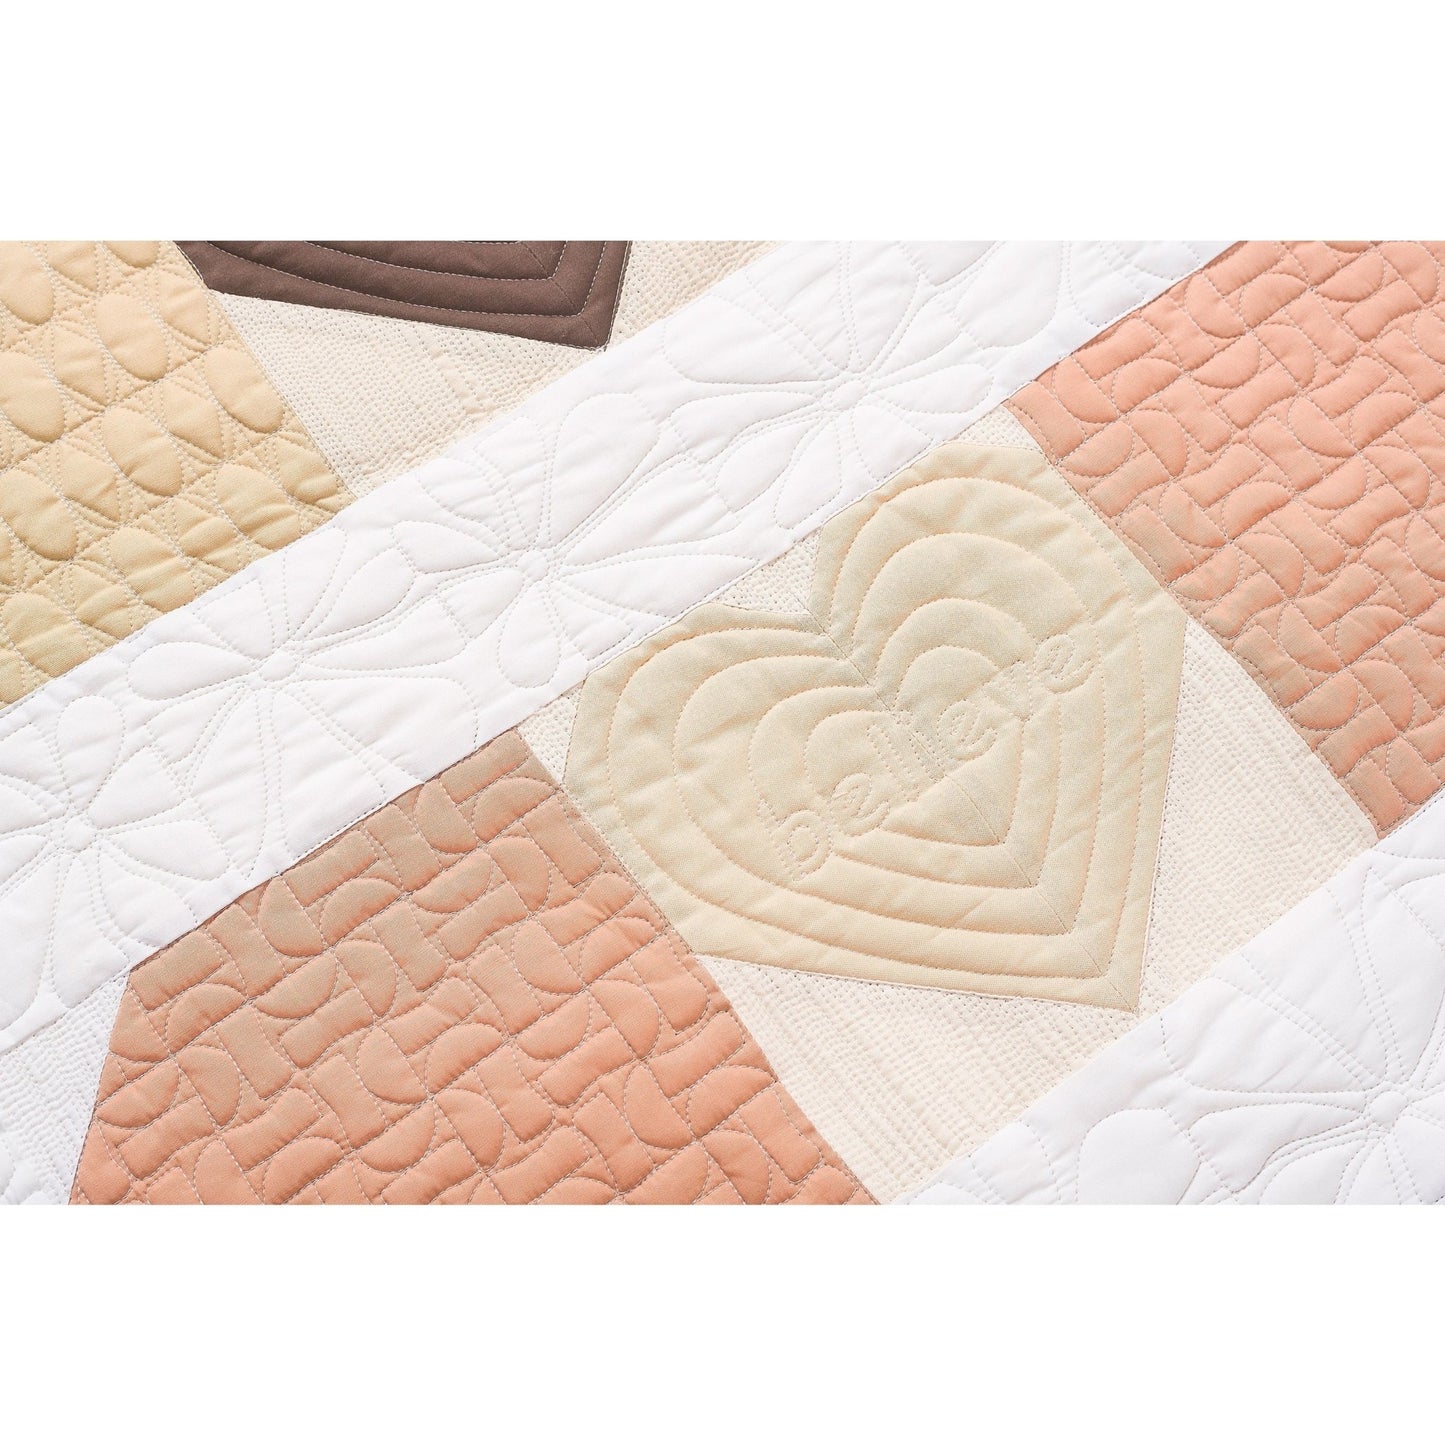 Band Aid Quilt Pattern by Quilter's Candy